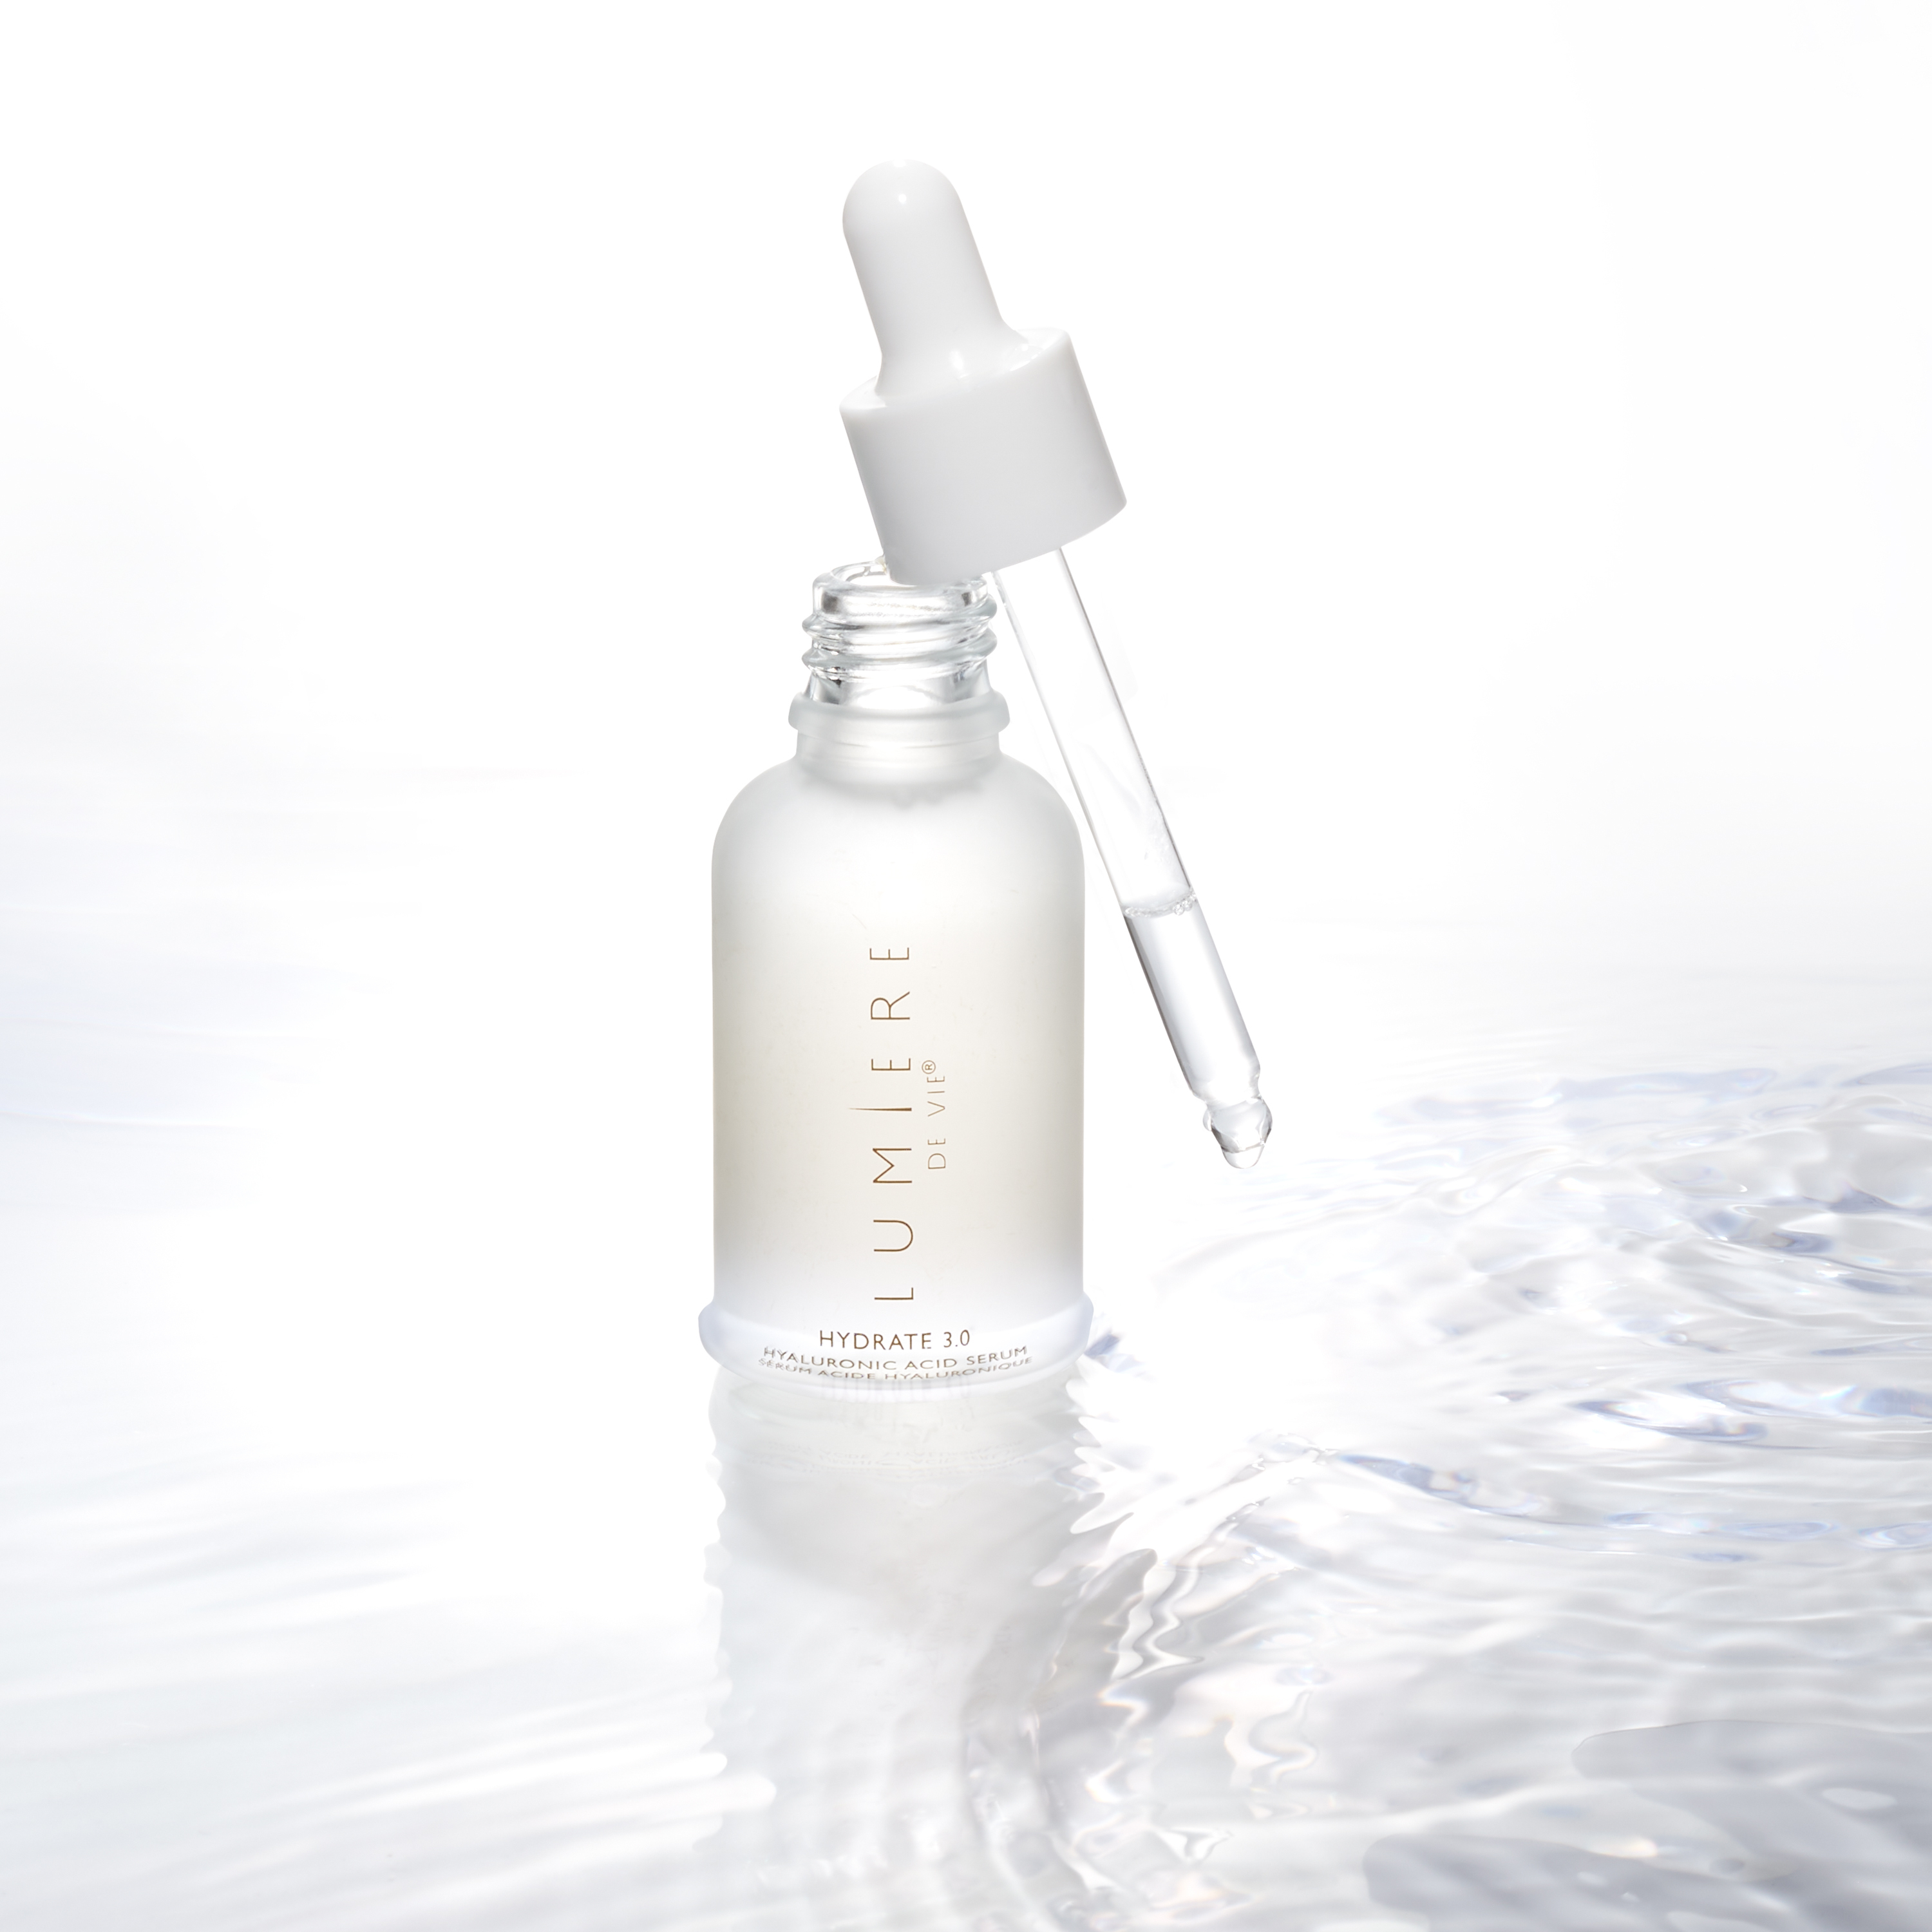 Lumiere de Vie Hydrate 3.0 with dropper angled over the side in a pool of serum.